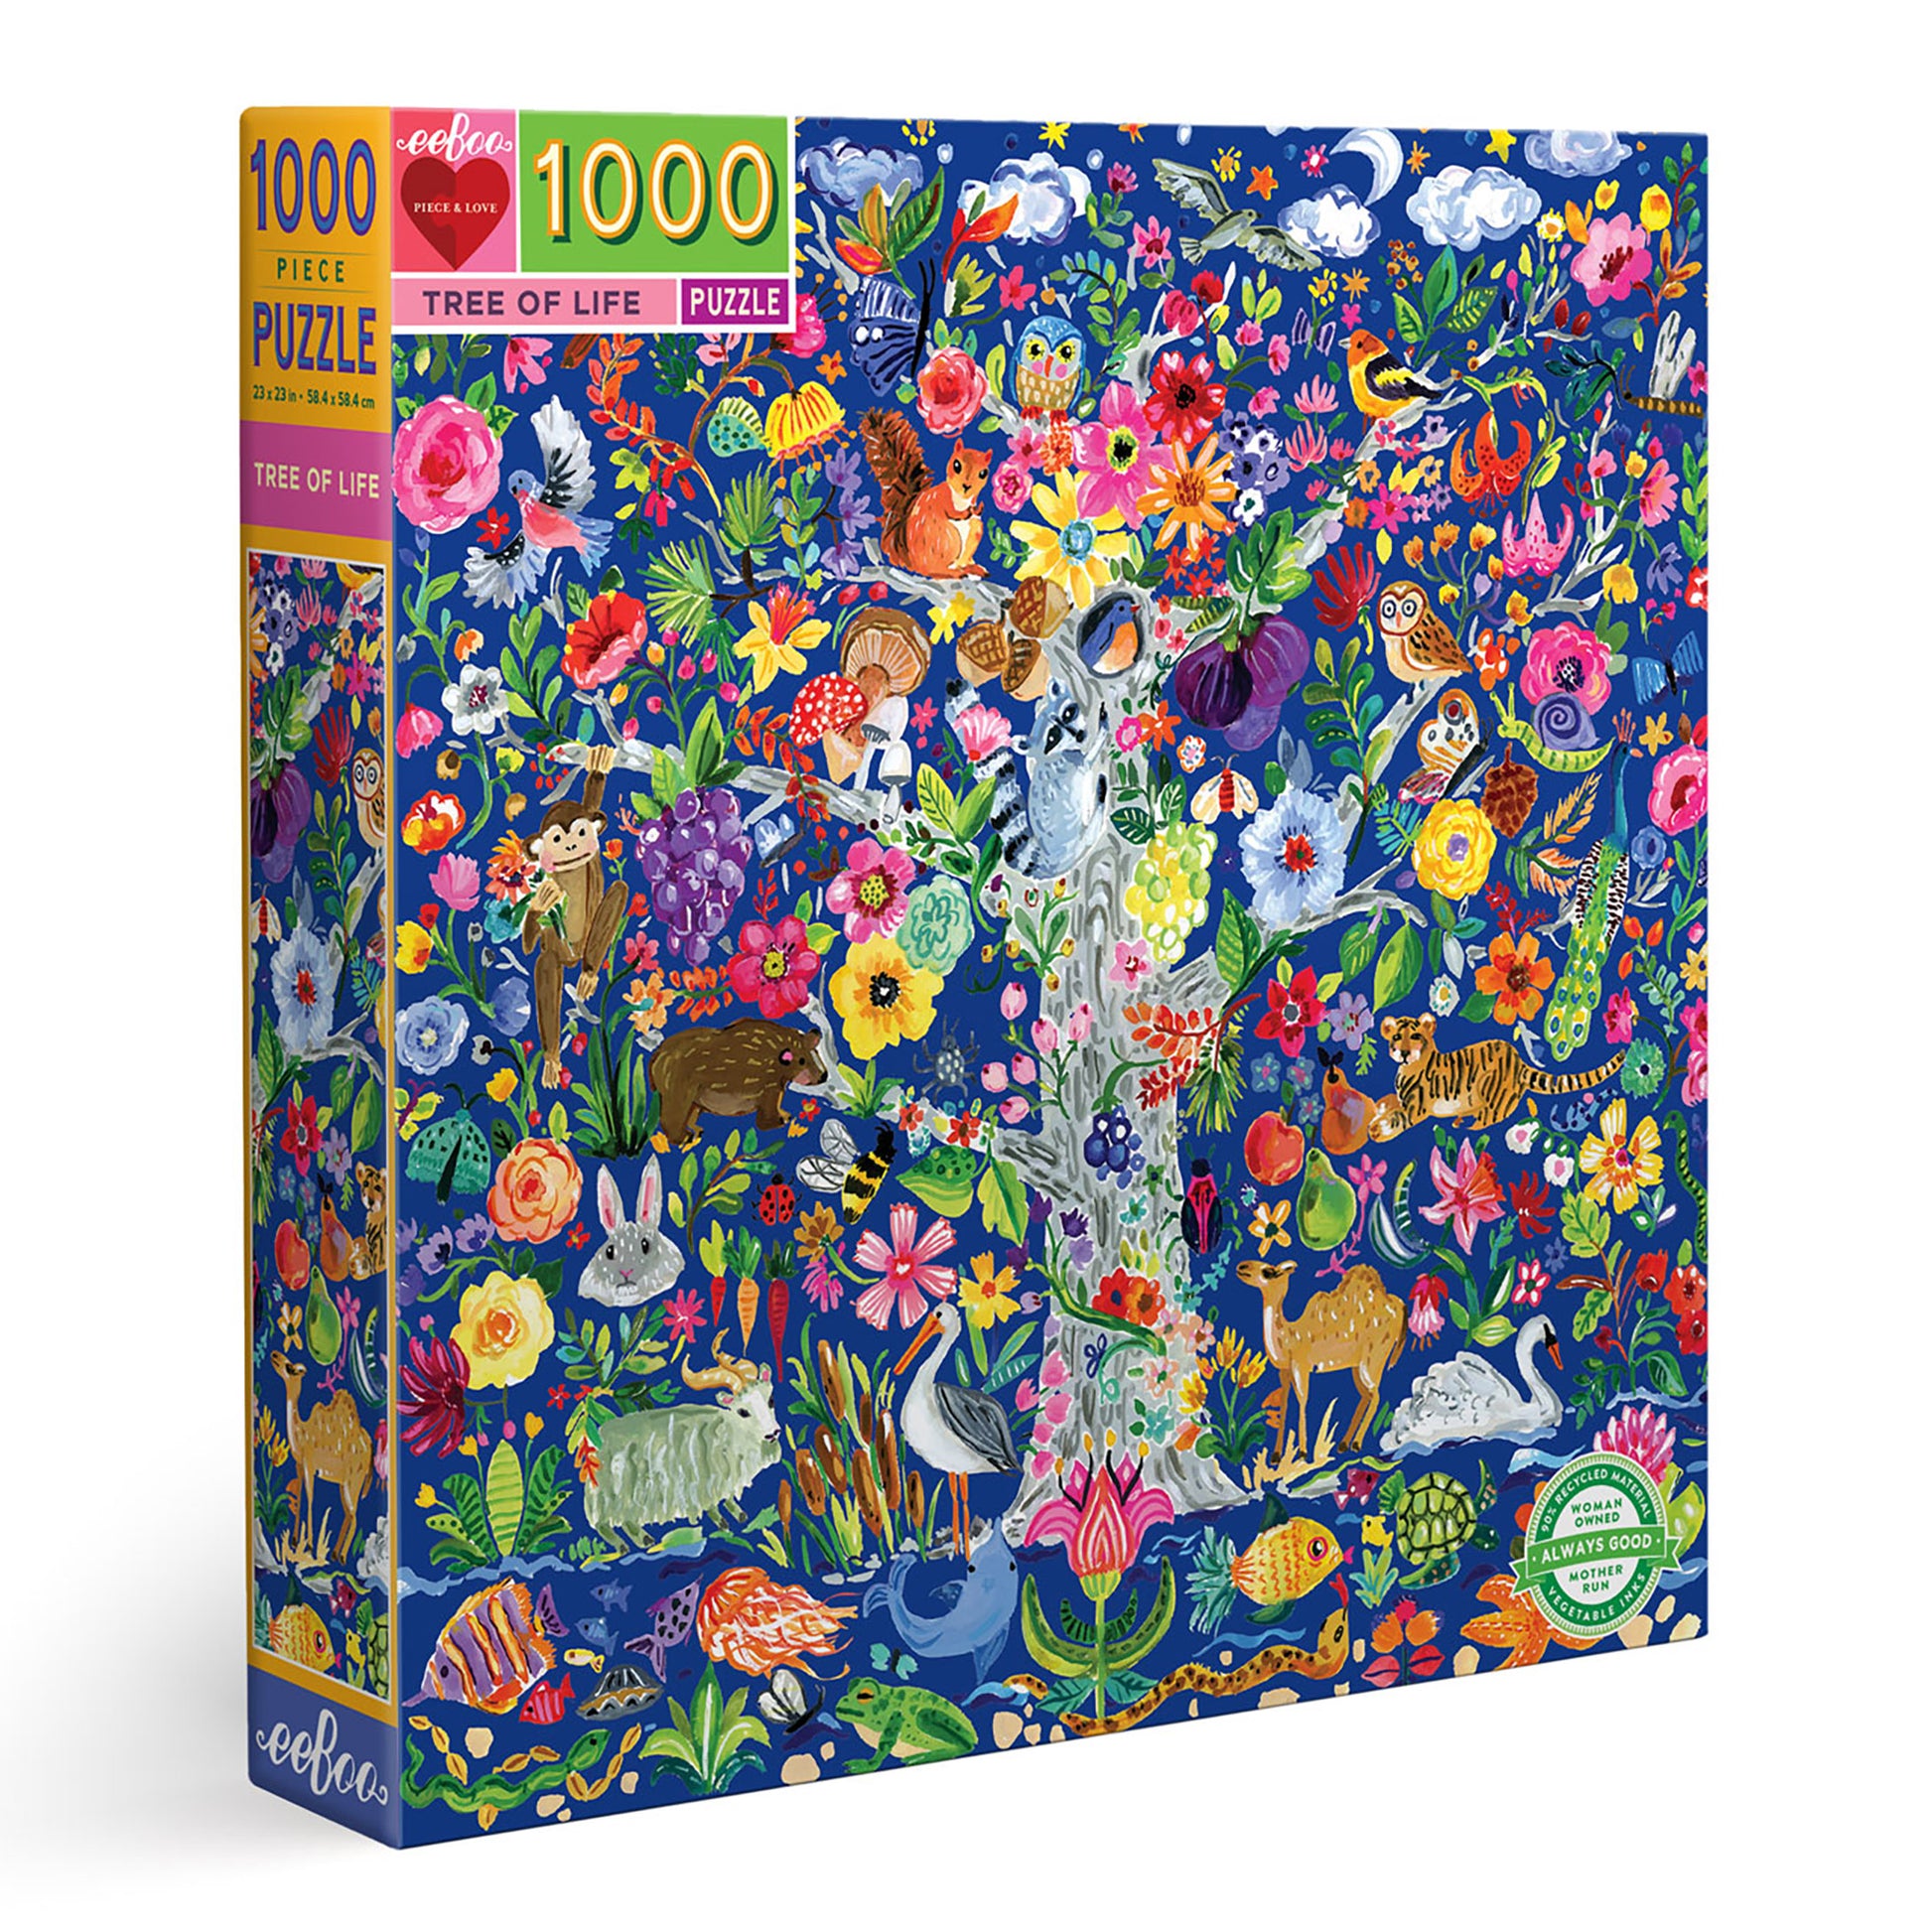 Best puzzles: 21 of the best easy to difficult jigsaw puzzles for